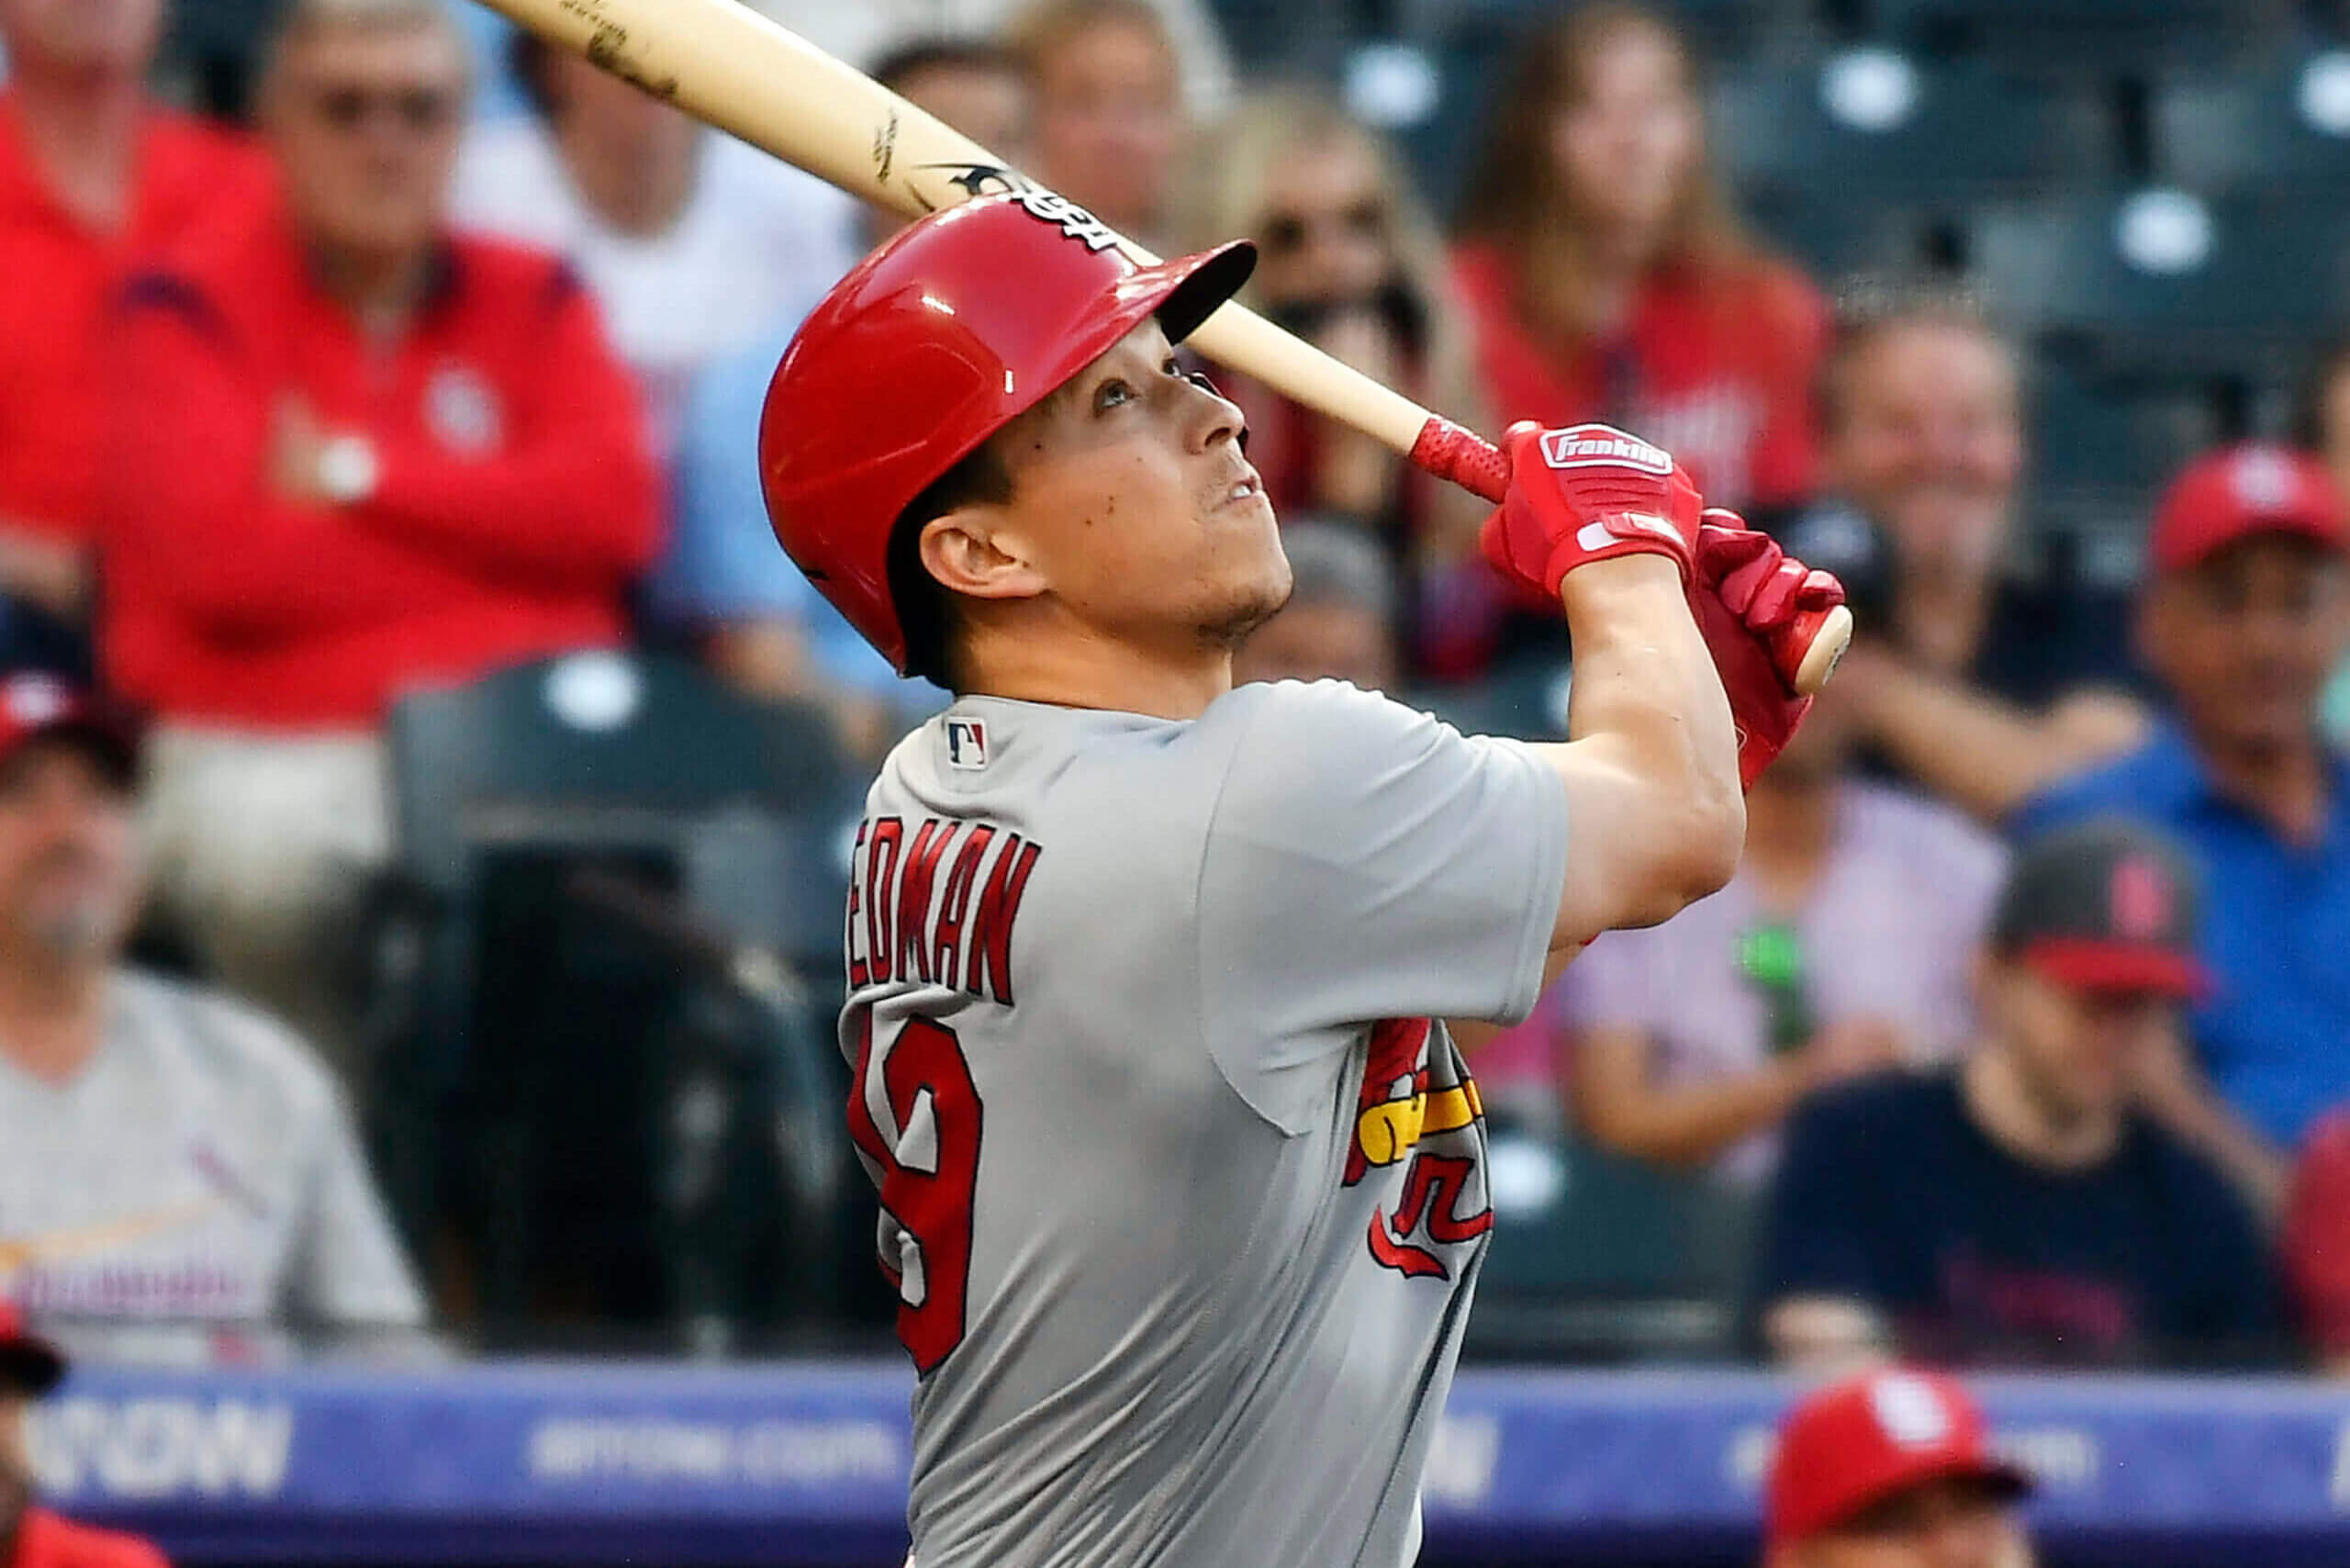 Dodgers engaged in talks with Cardinals for utilityman Tommy Edman: sources